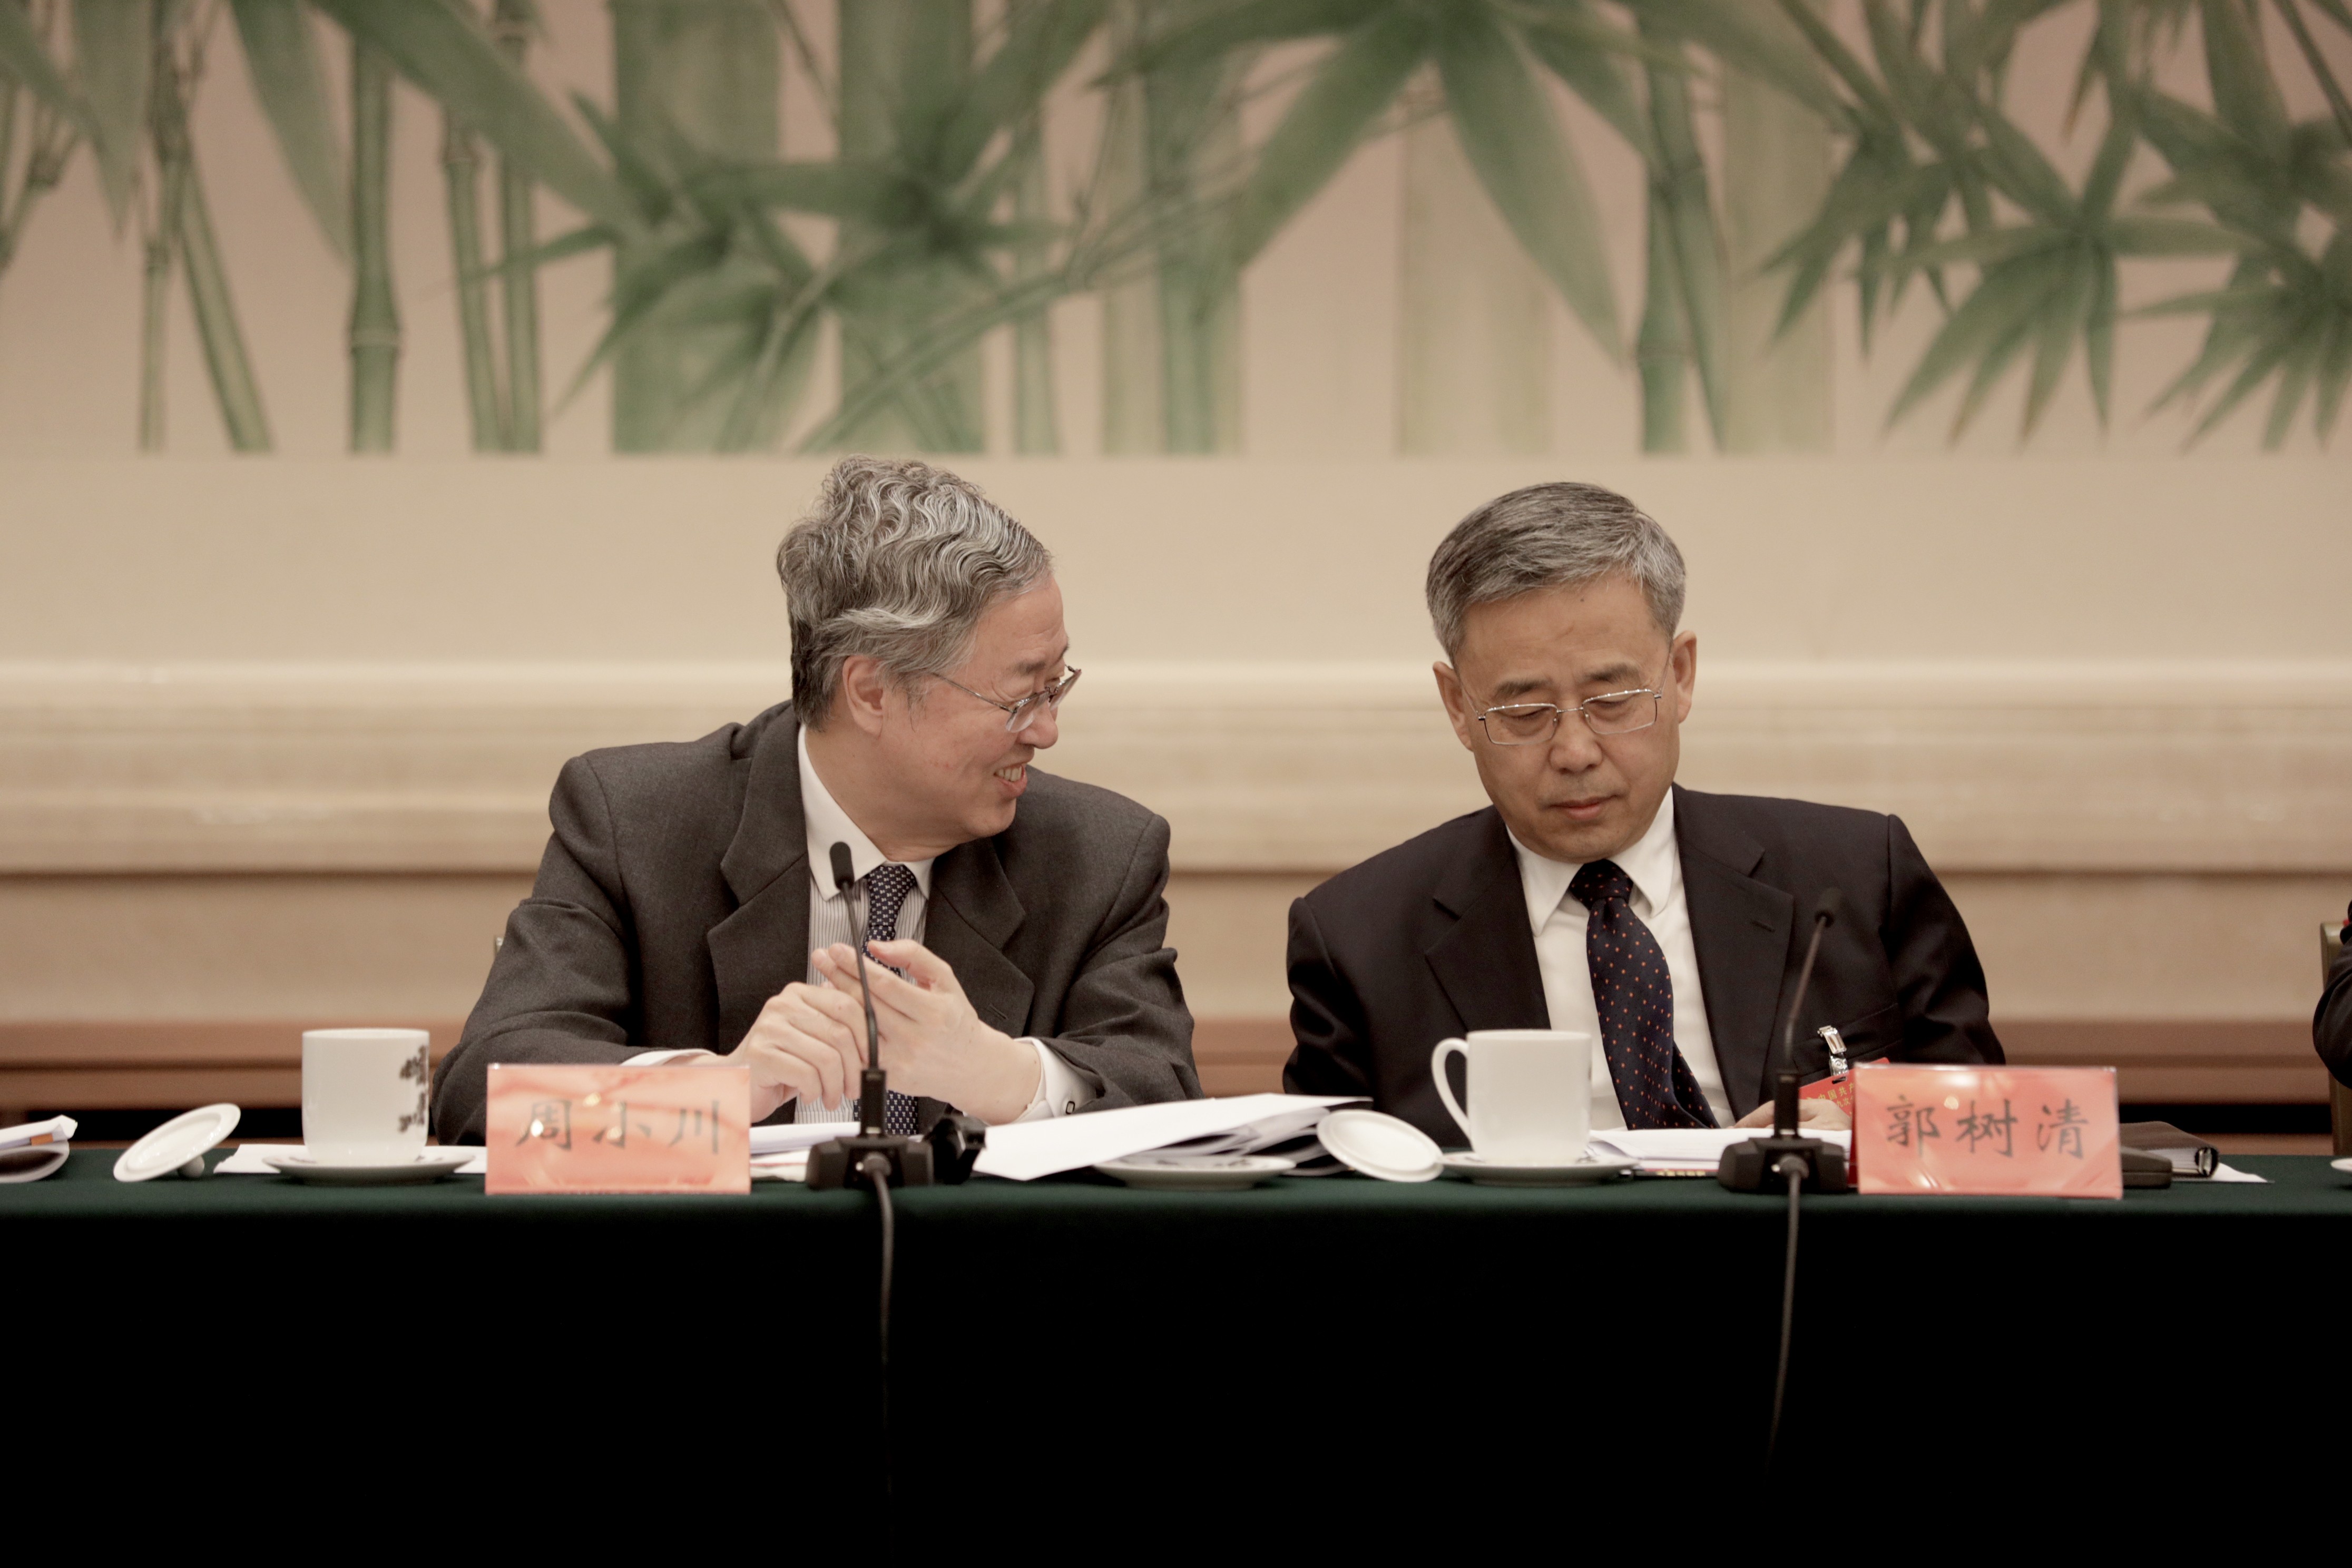 Zhou Xiaochuan, left, governor of the People's Bank of China (PBOC), left, pictured with Guo Shuqing this week at the Communist Party conference in Beijing. Photo: Bloomberg